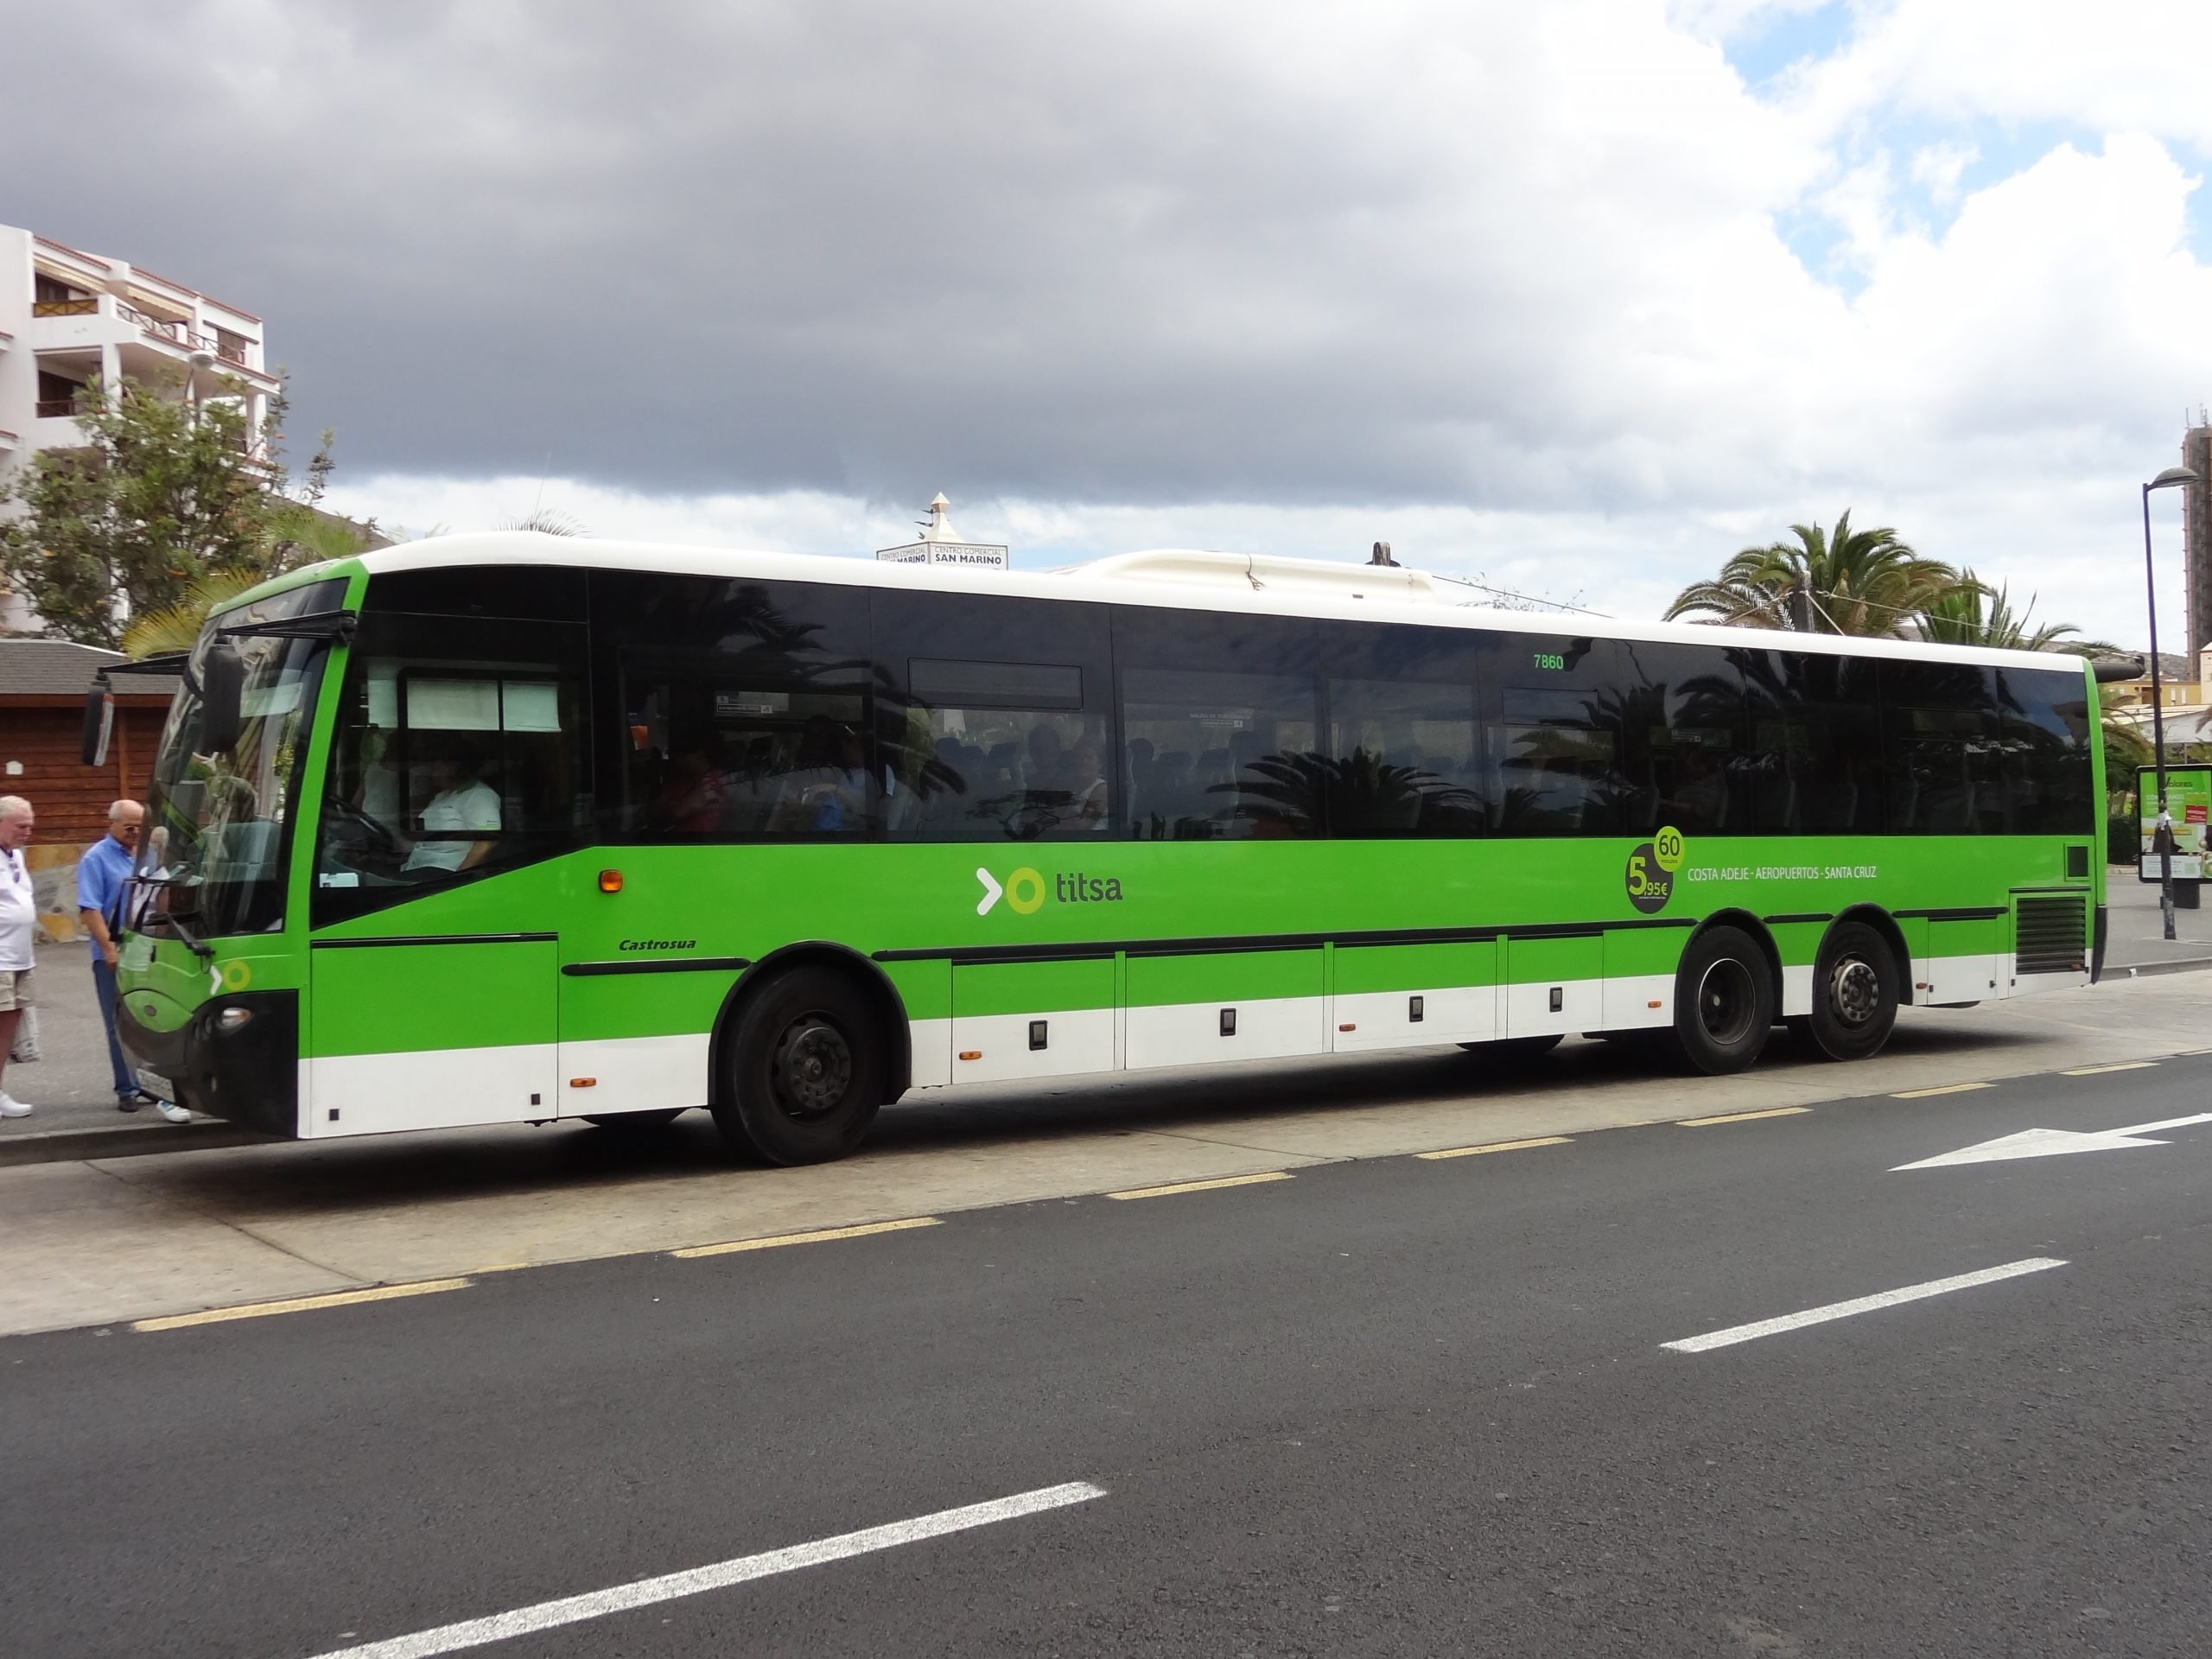 How To Get From South Tenerife Airport To Playa de las Americas - All Possible Ways, cheapest way from Tenerife airport to Playa de las Americas, Tenerife airport to Playa de las Americas, Tenerife airport to Playa de las Americas, Tenerife airport to Playa de las Americas, Tenerife Bus Airport, bus from Tenerife airport to Playa de las Americas, taxi Tenerife airport to Playa de las Americas, Uber Tenerife airport to Playa de las Americas, Tenerife airport to Playa de las Americas by bus, Tenerife airport to Playa de las Americas, Tenerife to Playa de las Americas, Titsa bus fare Tenerife airport to Playa de las Americas, Titsa Bus Tenerife Airport, Day Travel Card Tenerife